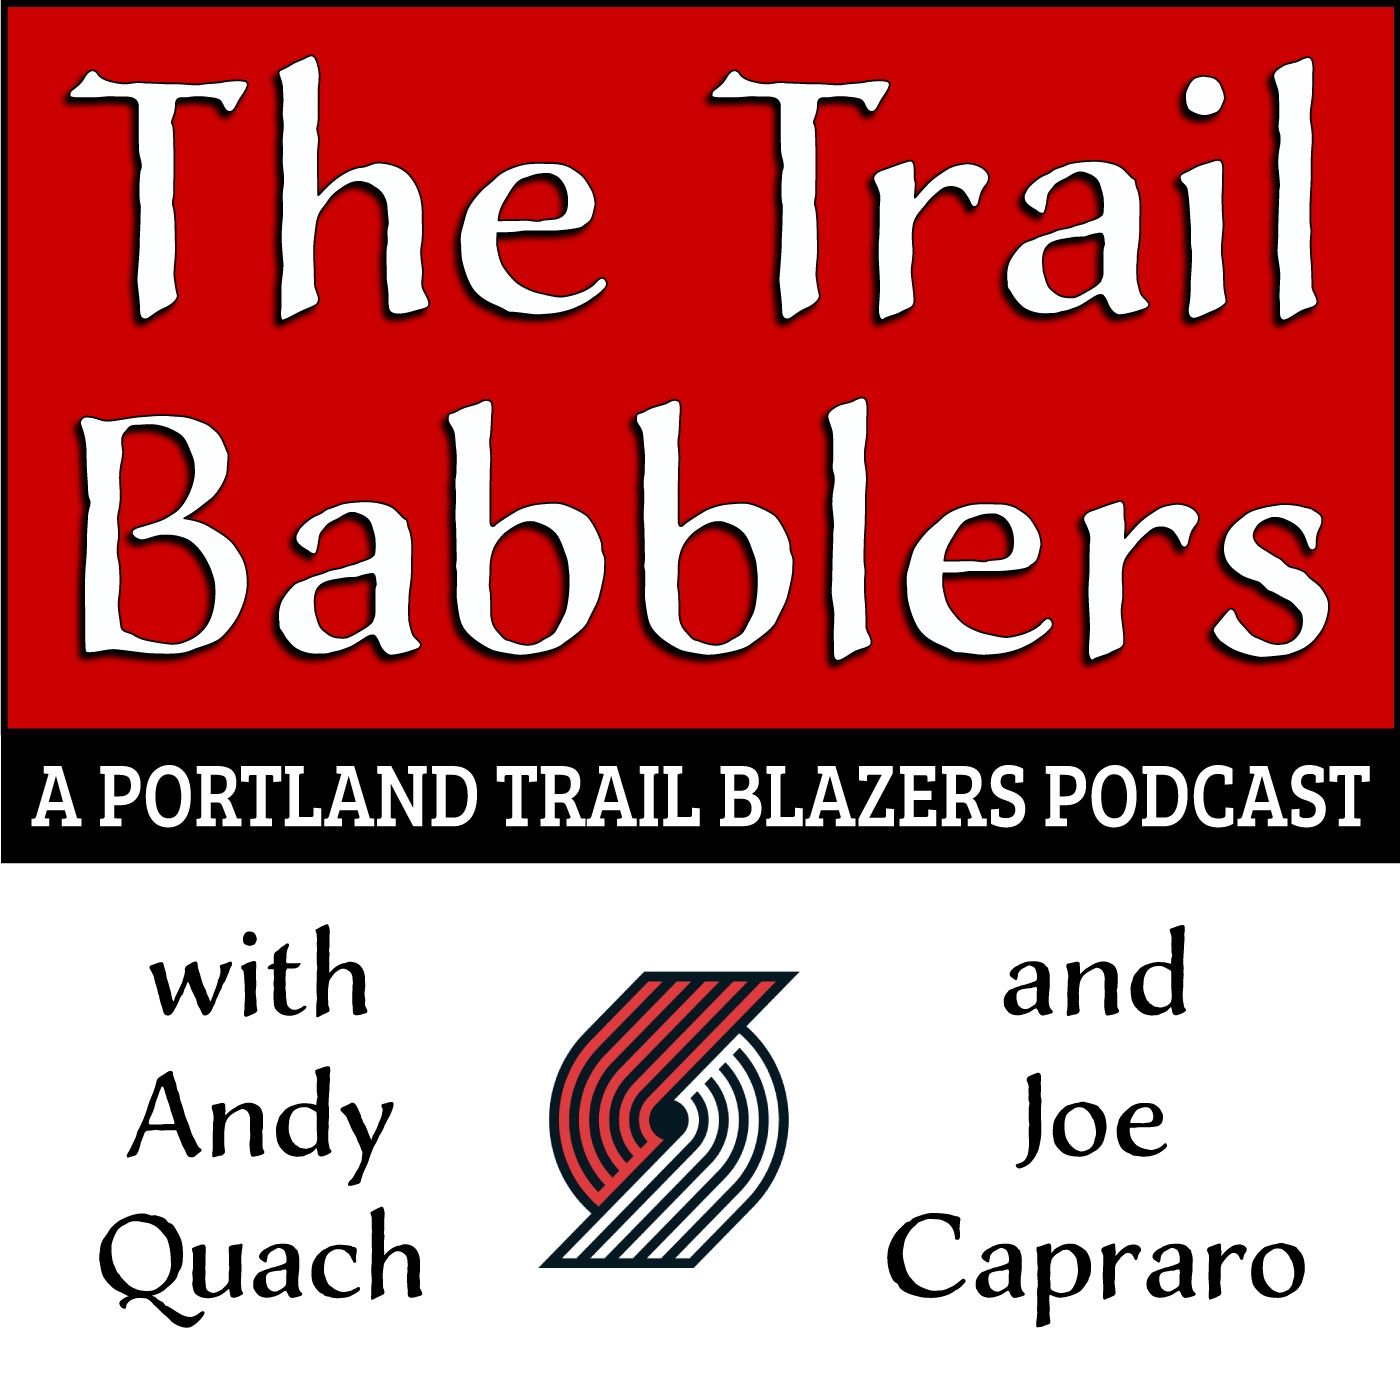 The Trail Babblers